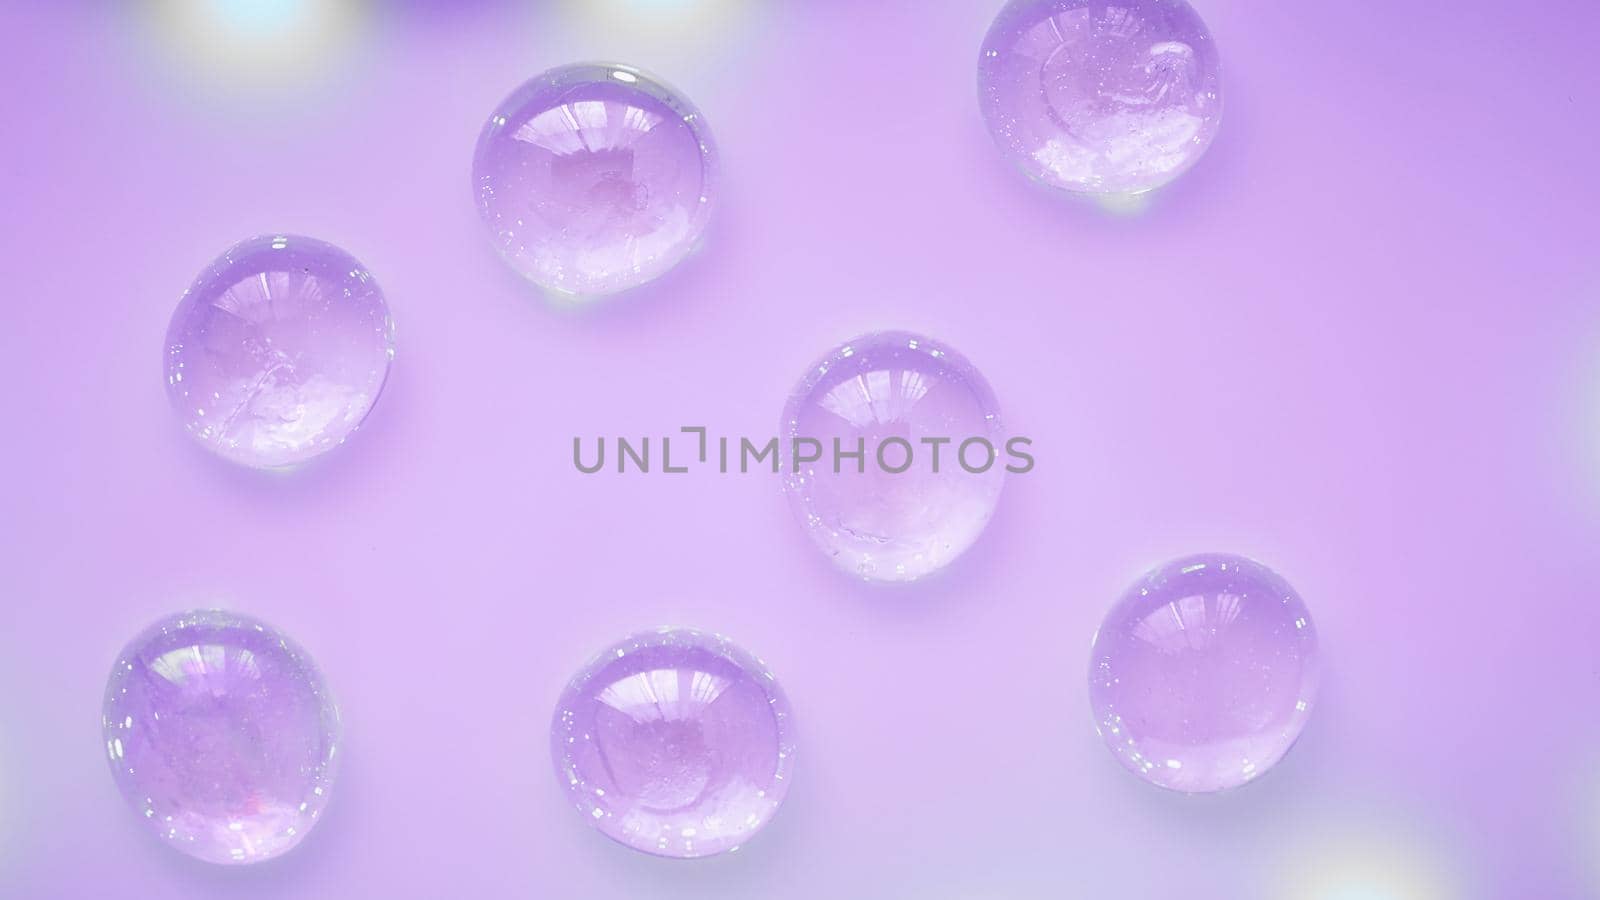 Abstract glass drops beads on a neon purple background, copy space